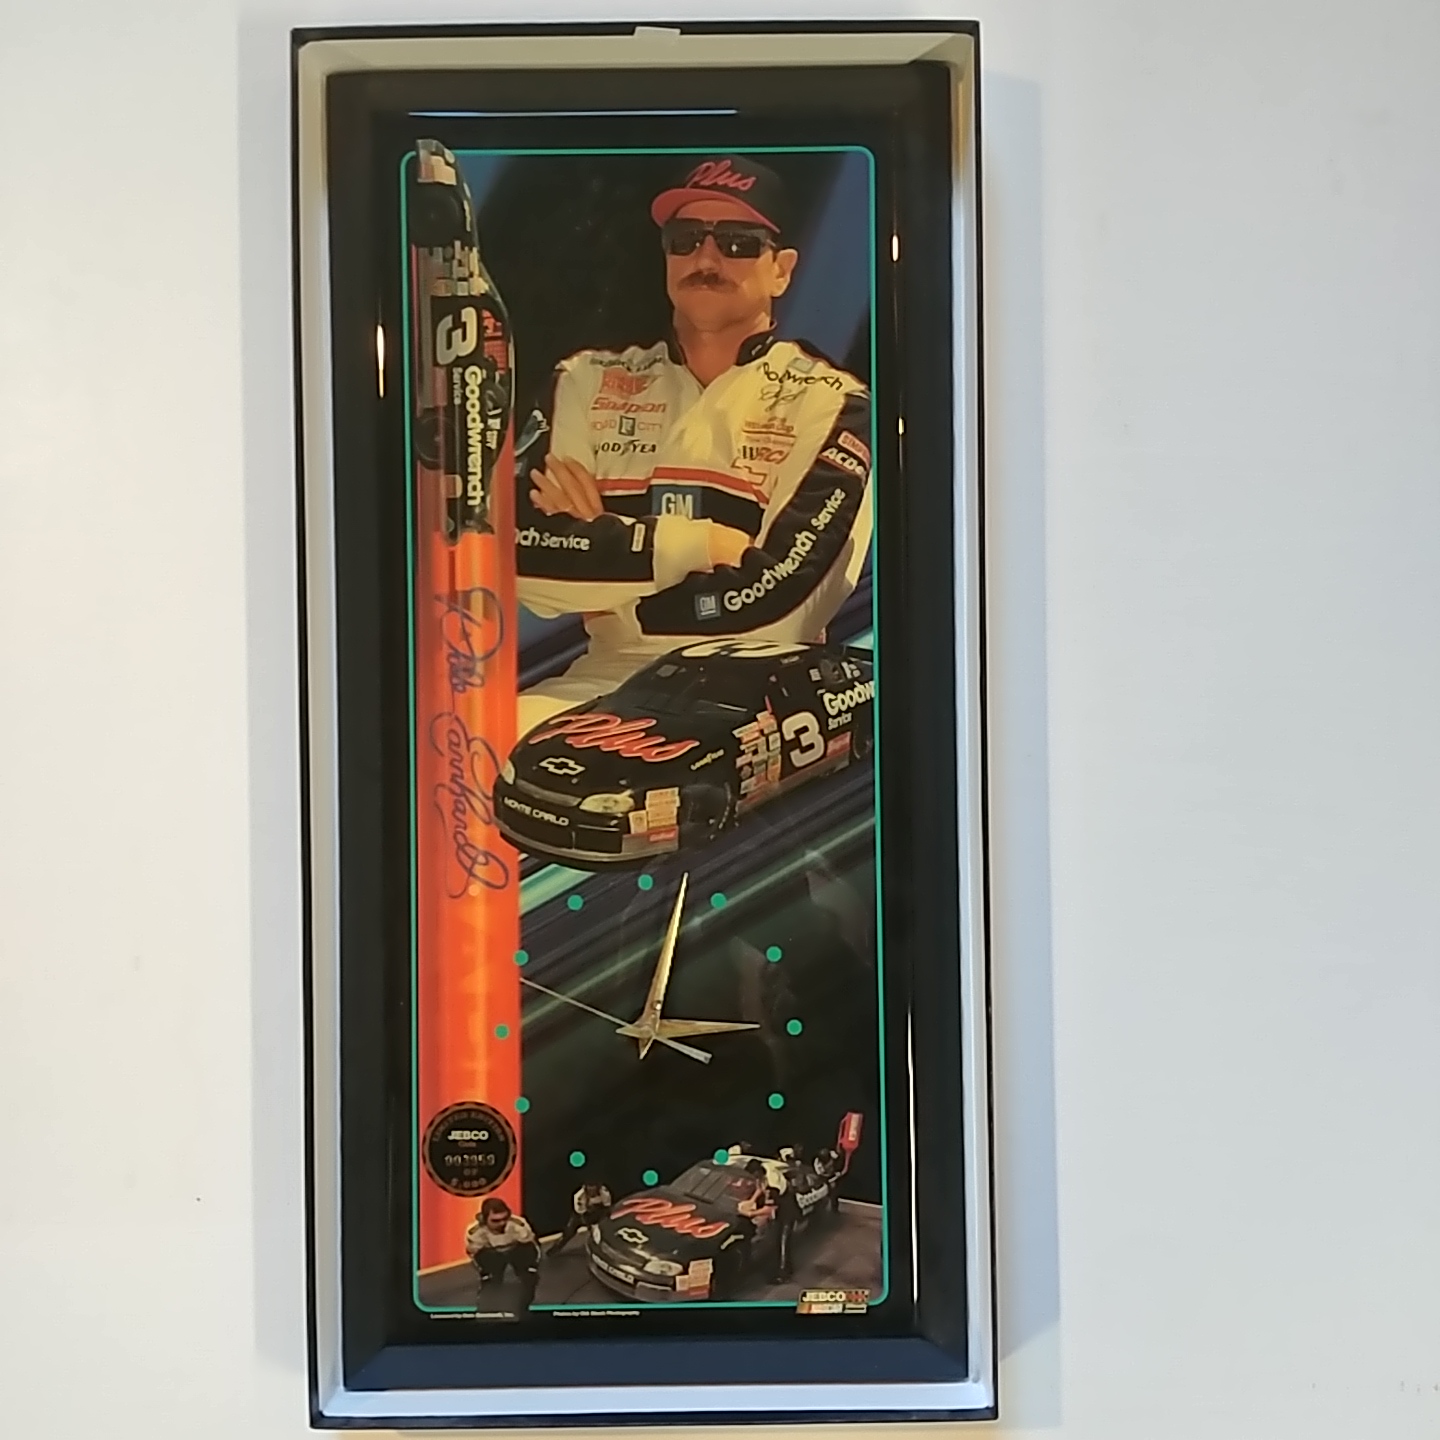 1997 Dale Earnhardt Goodwrench Plus clock